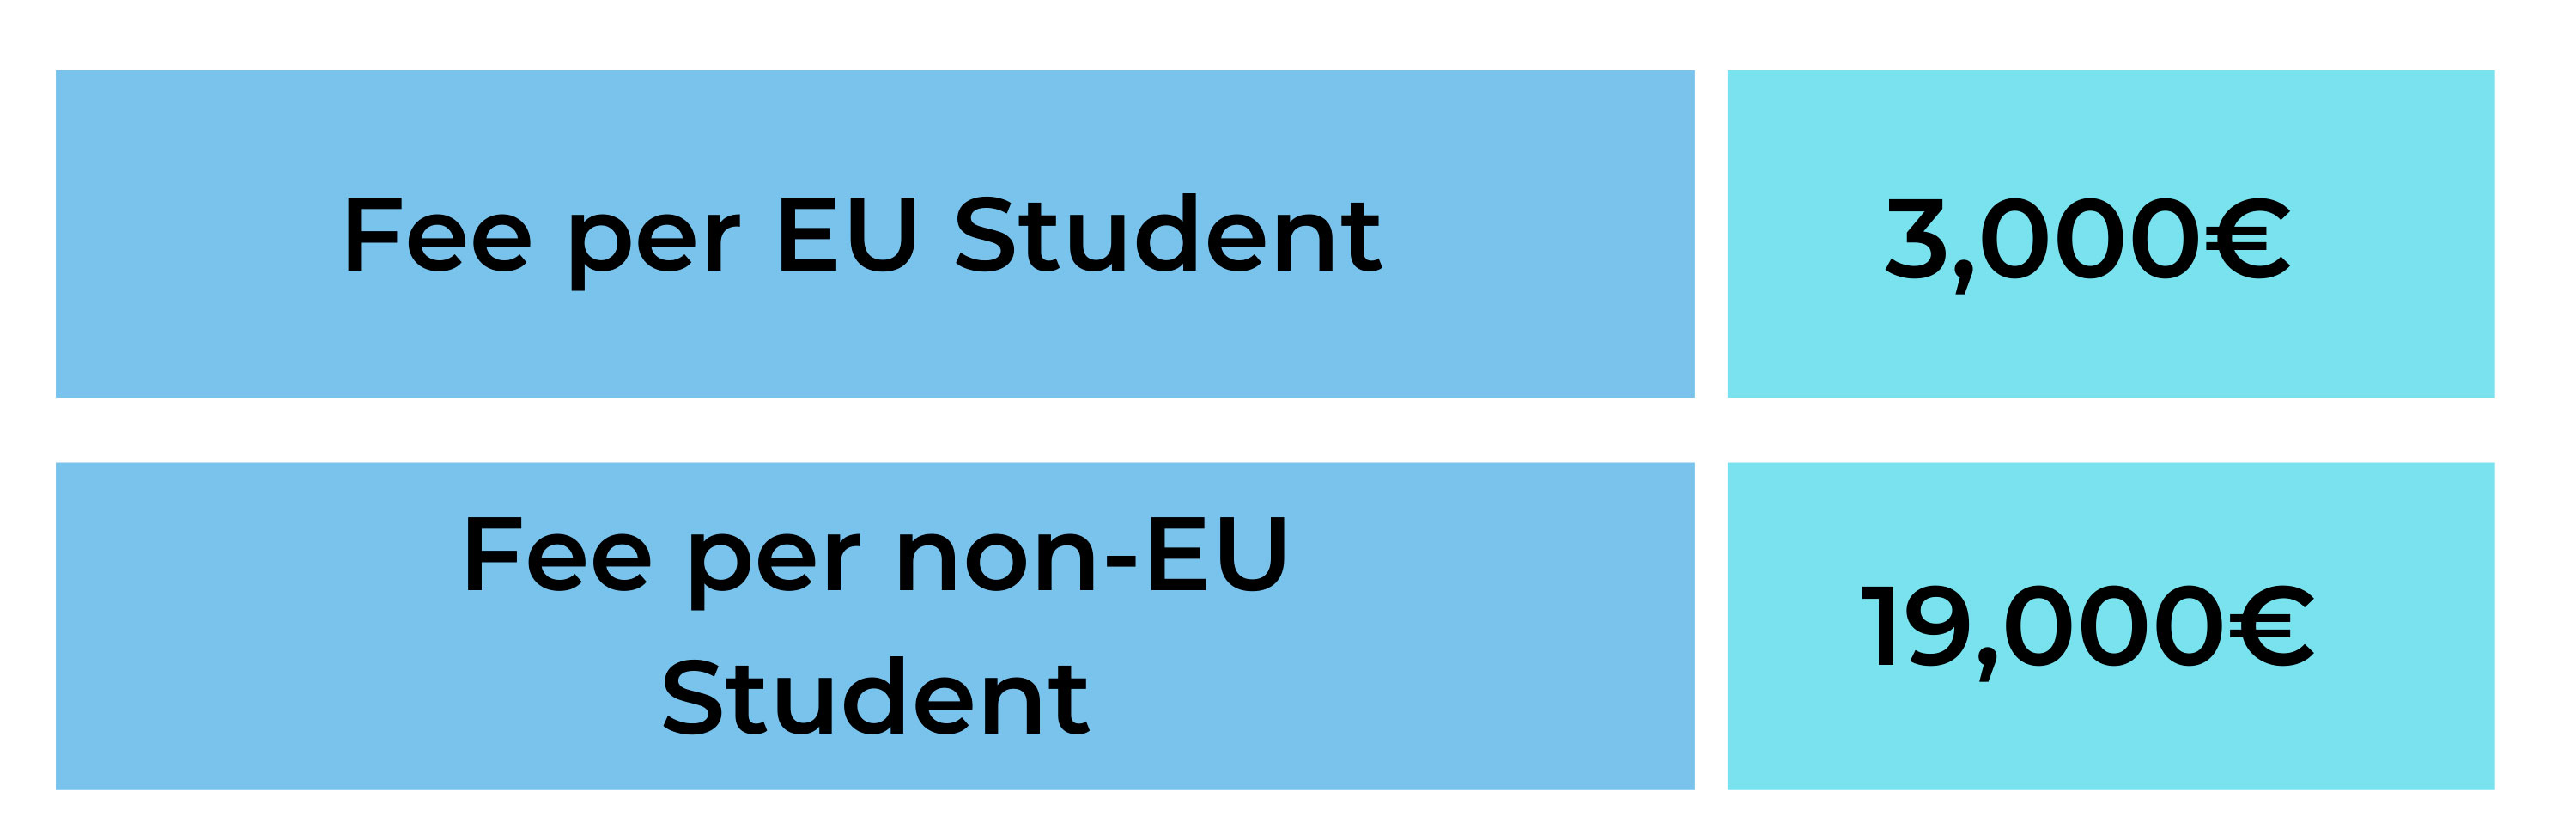 Fee table for EU Students (3,000€) and for Non-EU Students (19,000€)